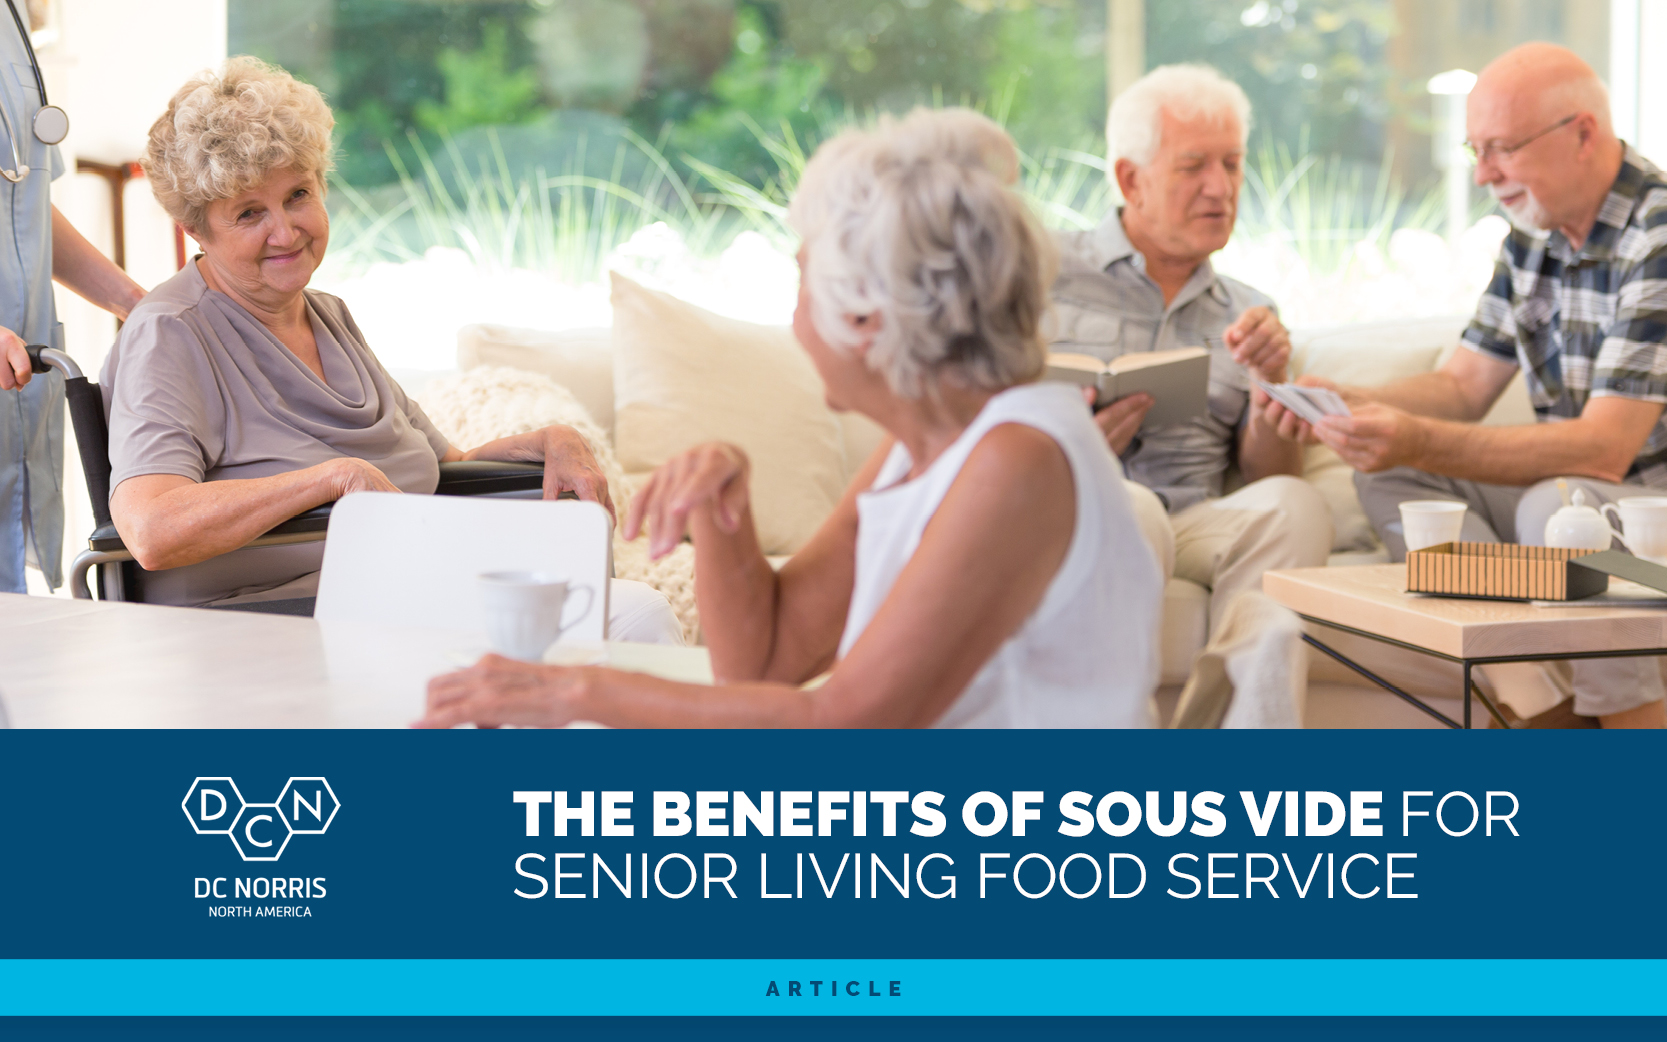 a group of content seniors in a communal living space at a senior living facility. Below the image is the DC Norris North America logo and a headline that reads 'The Benefits of Sous Vide for Senior Living Food Service